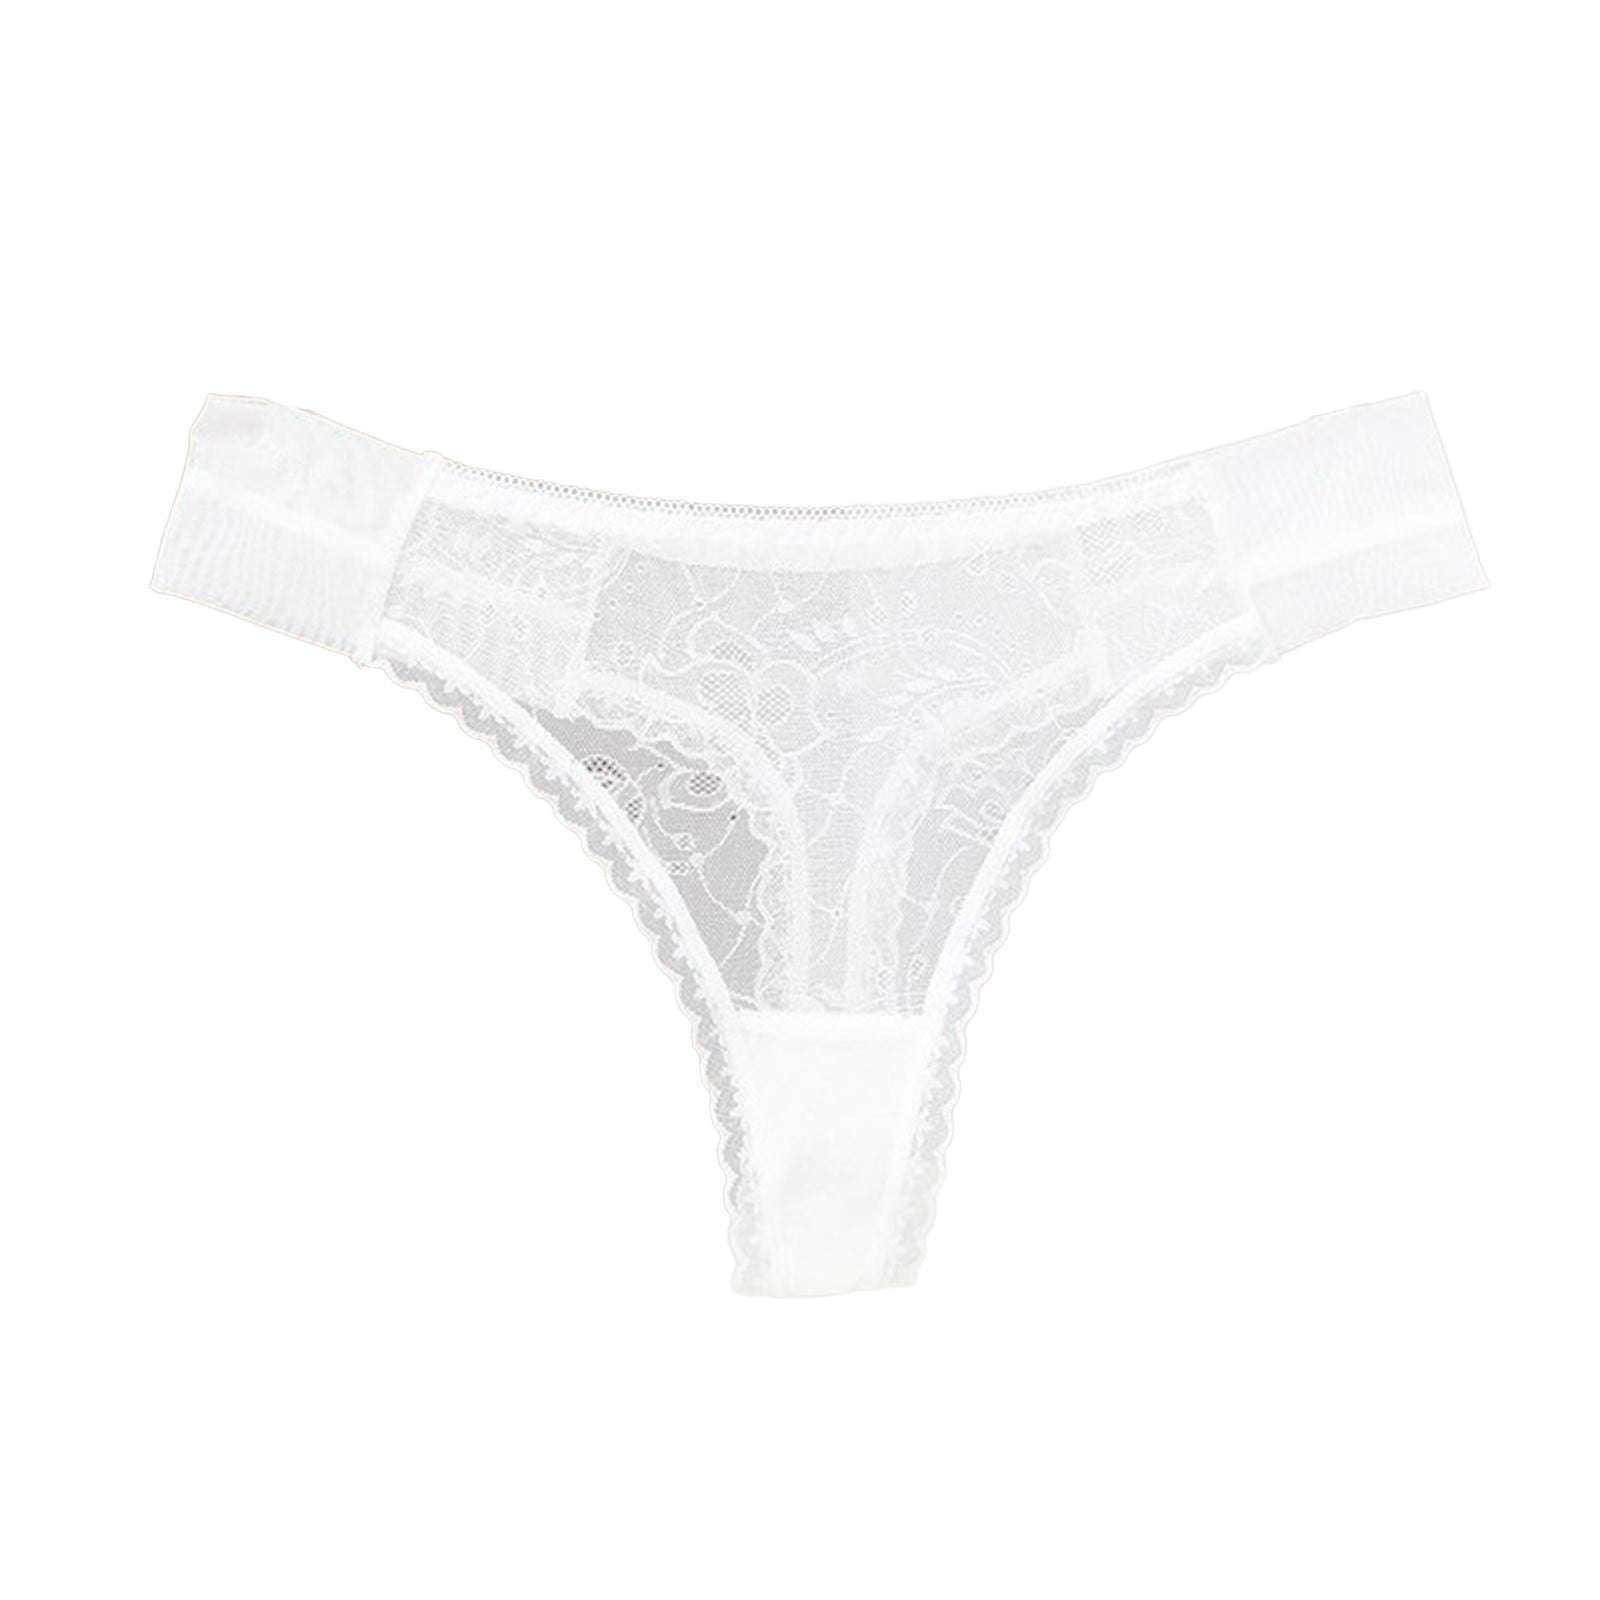 Aayomet Panties For Women Ladies Show Wear Fashion Soft Ice Silk Seamless  Low Waist Lace Hollow Briefs,White M 